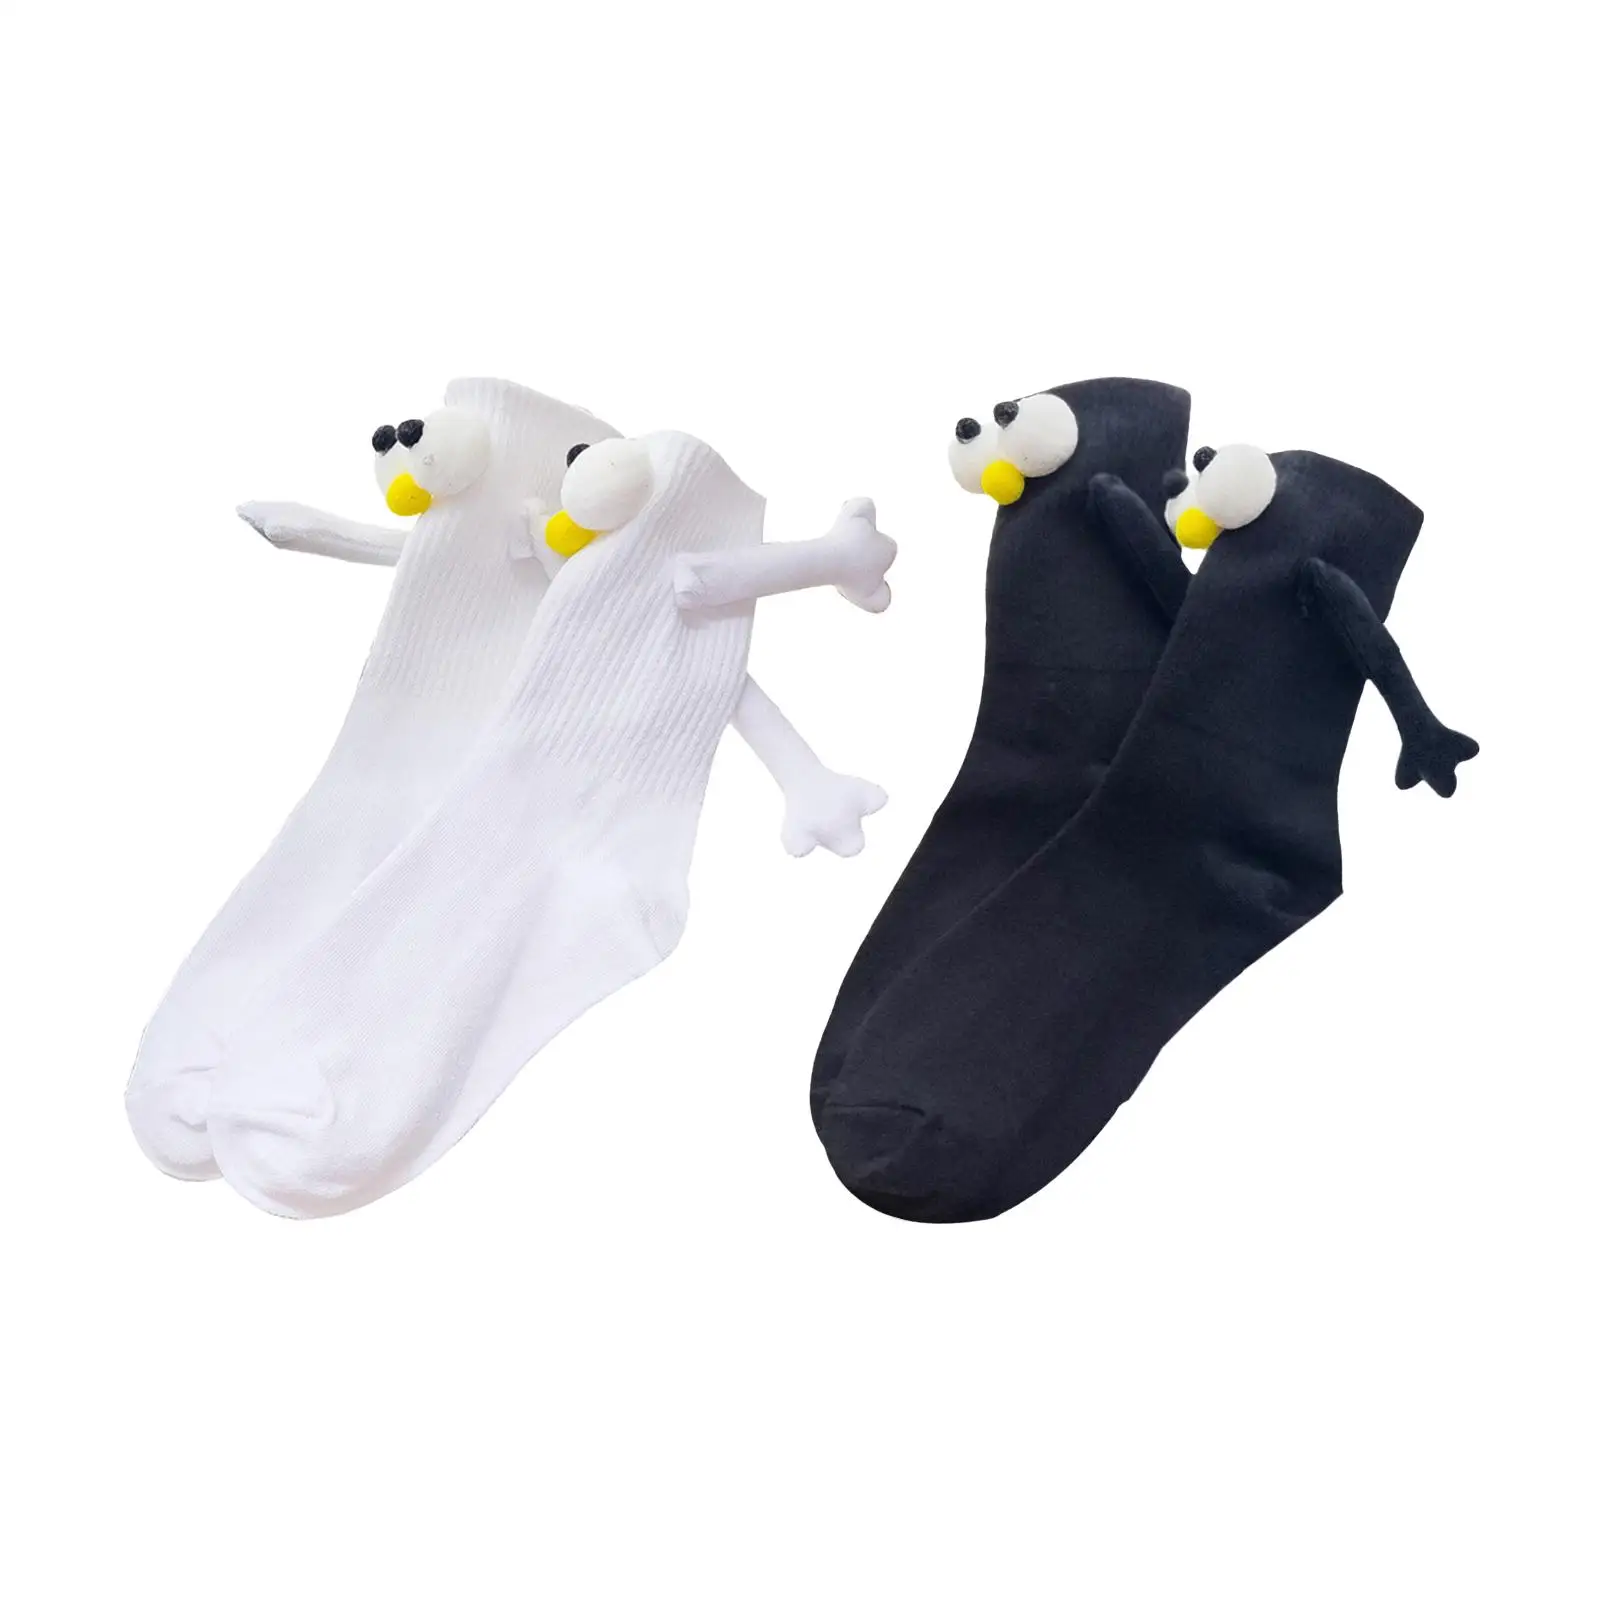 Suction 3D Couple Socks Couple Holding Hands Sock Comfortable Absorb Sweat